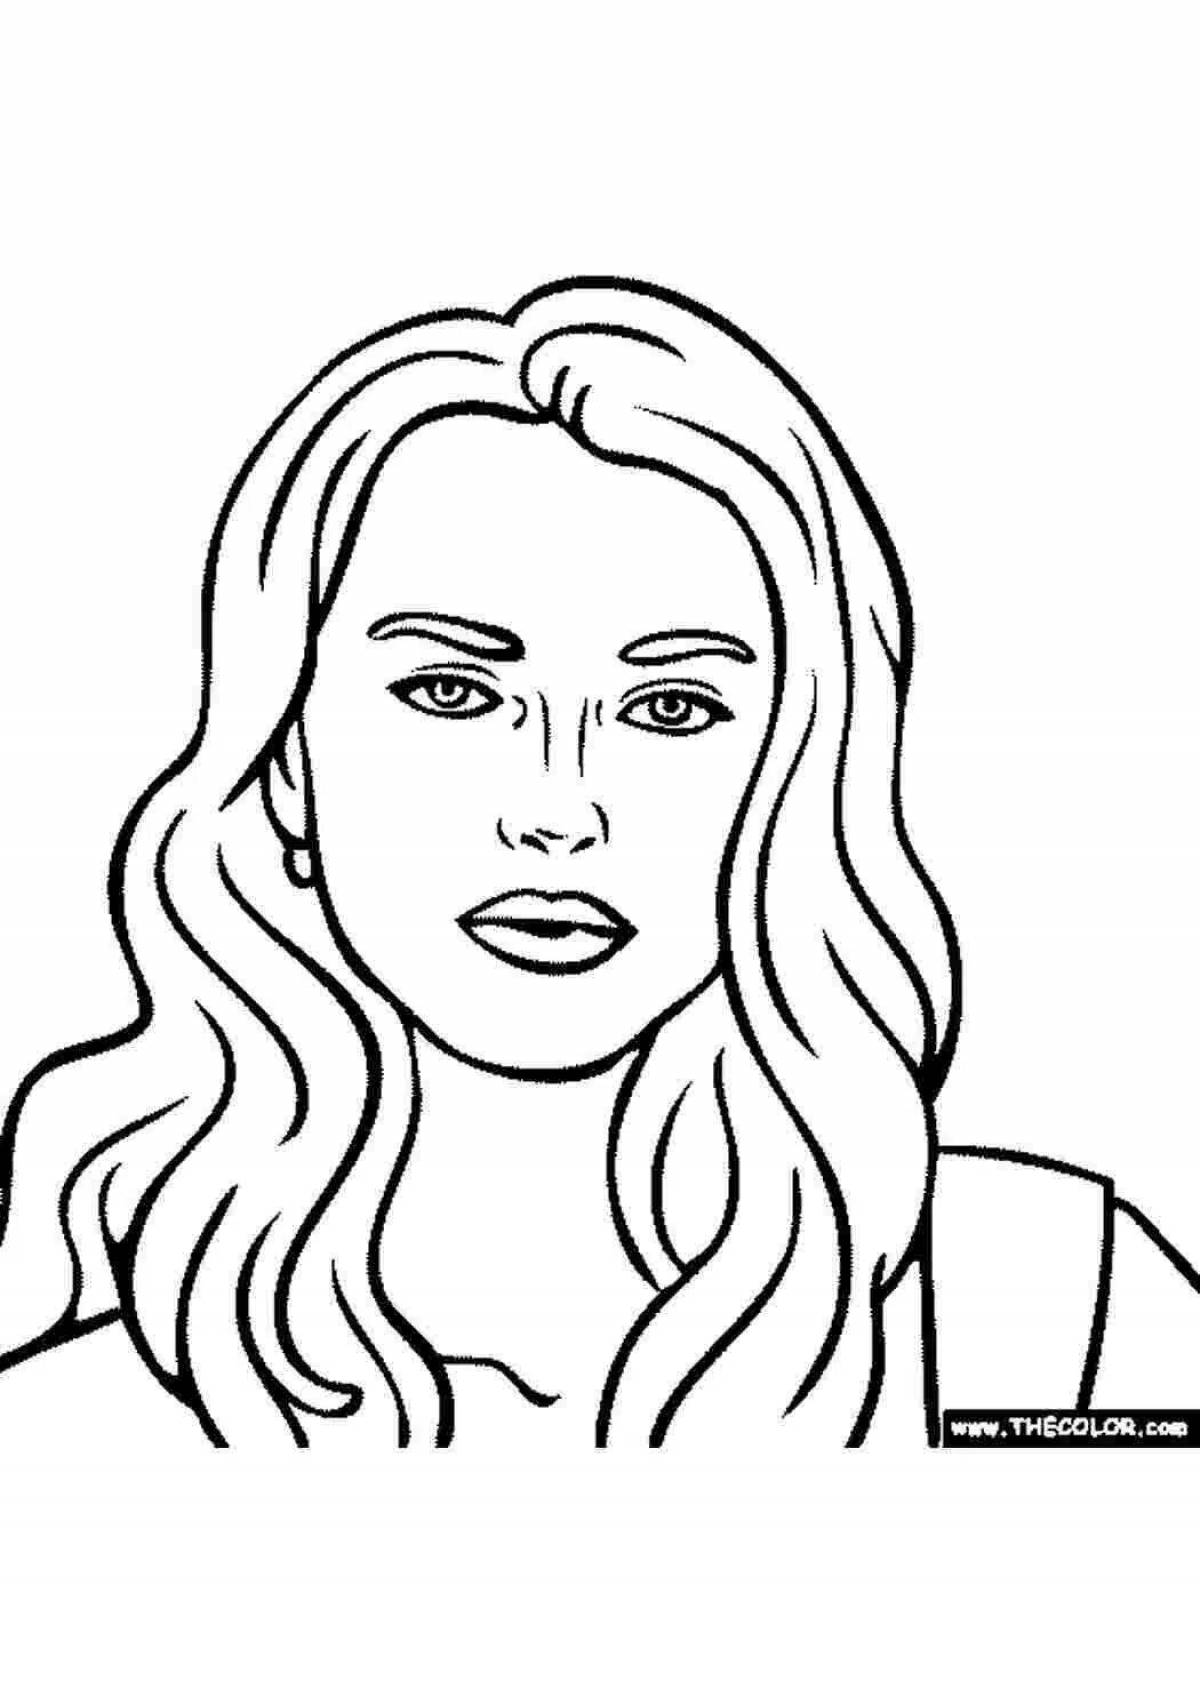 Coloring page for children with a violent woman's face